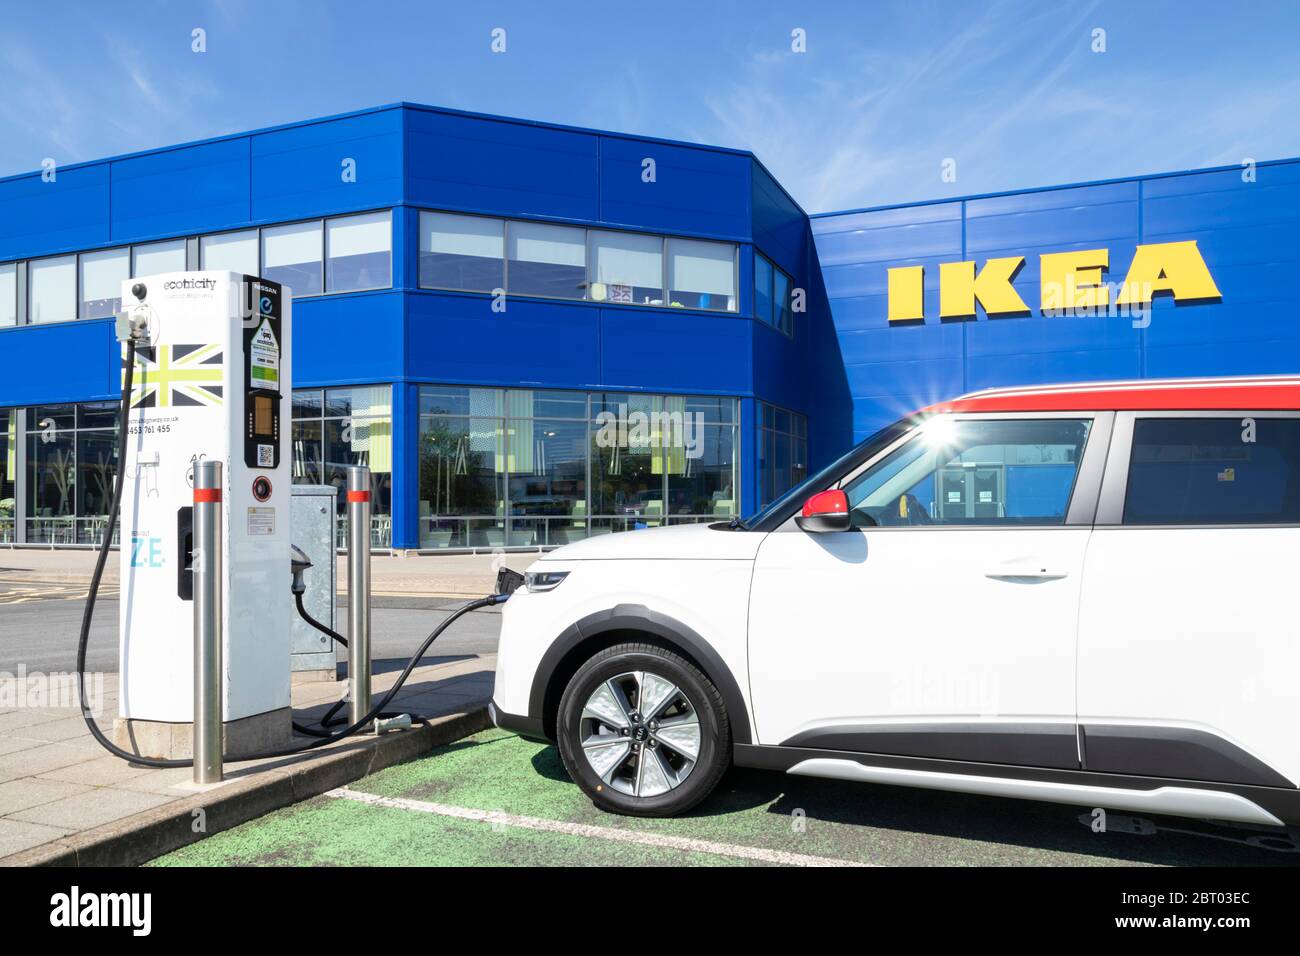 Large yellow IKEA logo sign on the side of blue IKEA warehouse with an electric car charging Nottingham East Midlands England UK GB Europe Stock Photo